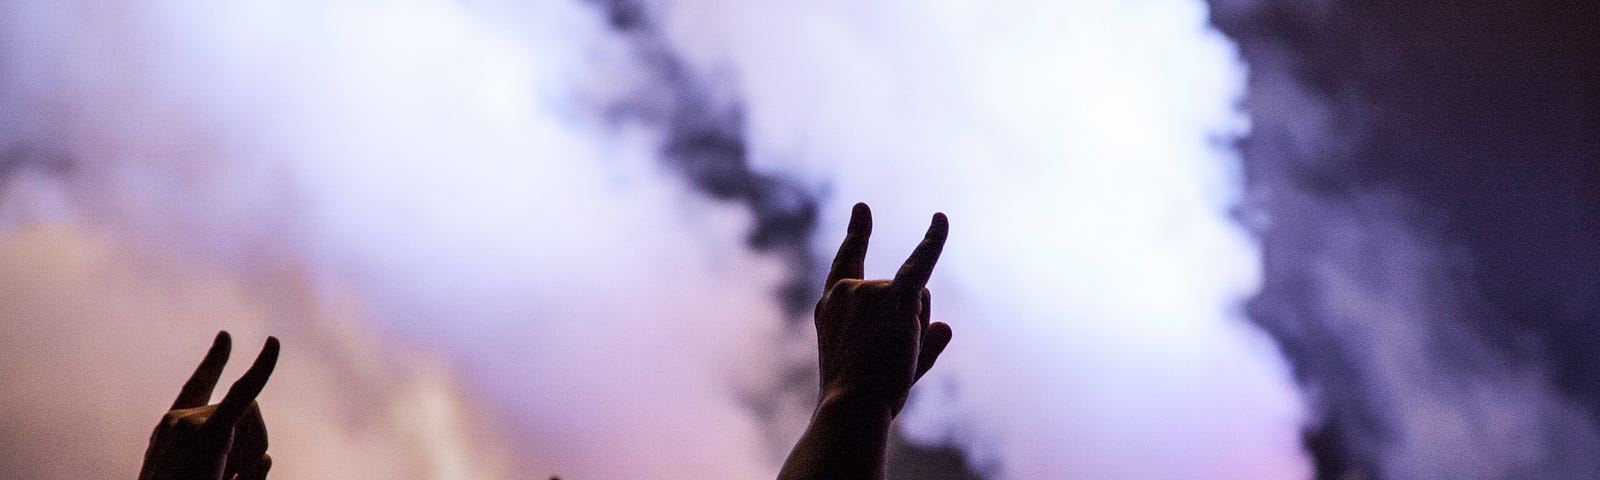 A group of people at a concert have their arms in the air, making devil horns against the haze of smoke from pyrotechnic displays.